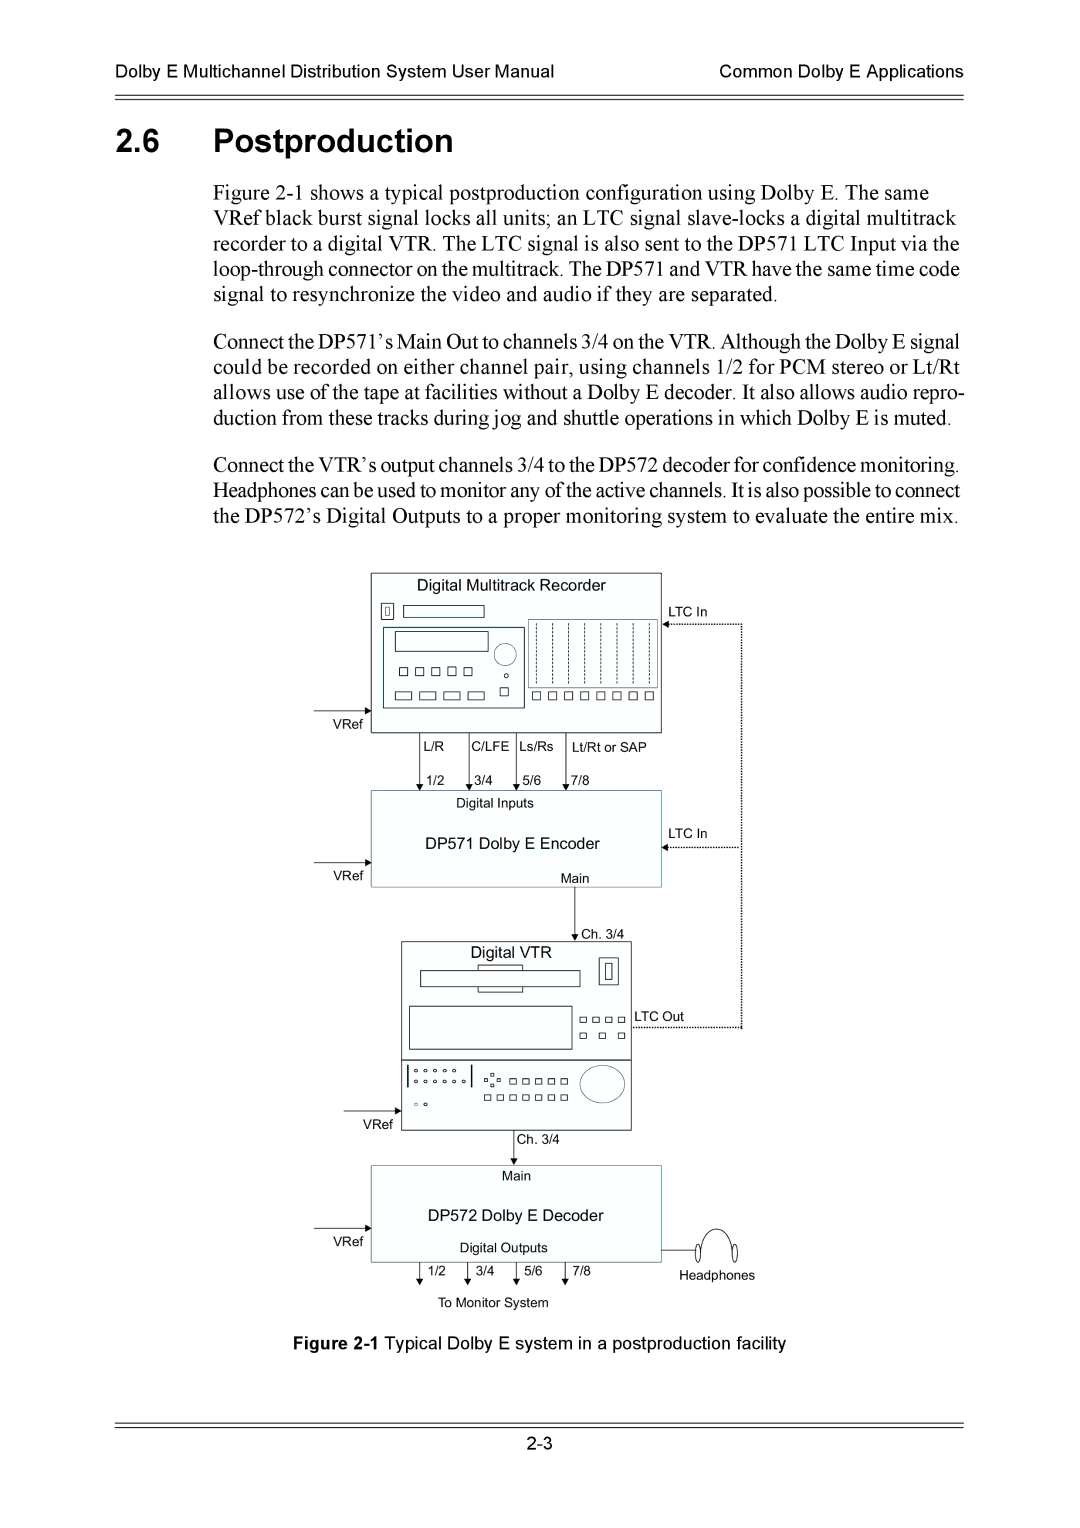 Dolby Laboratories DP572, DP571 user manual Postproduction, 1Typical Dolby E system in a postproduction facility 